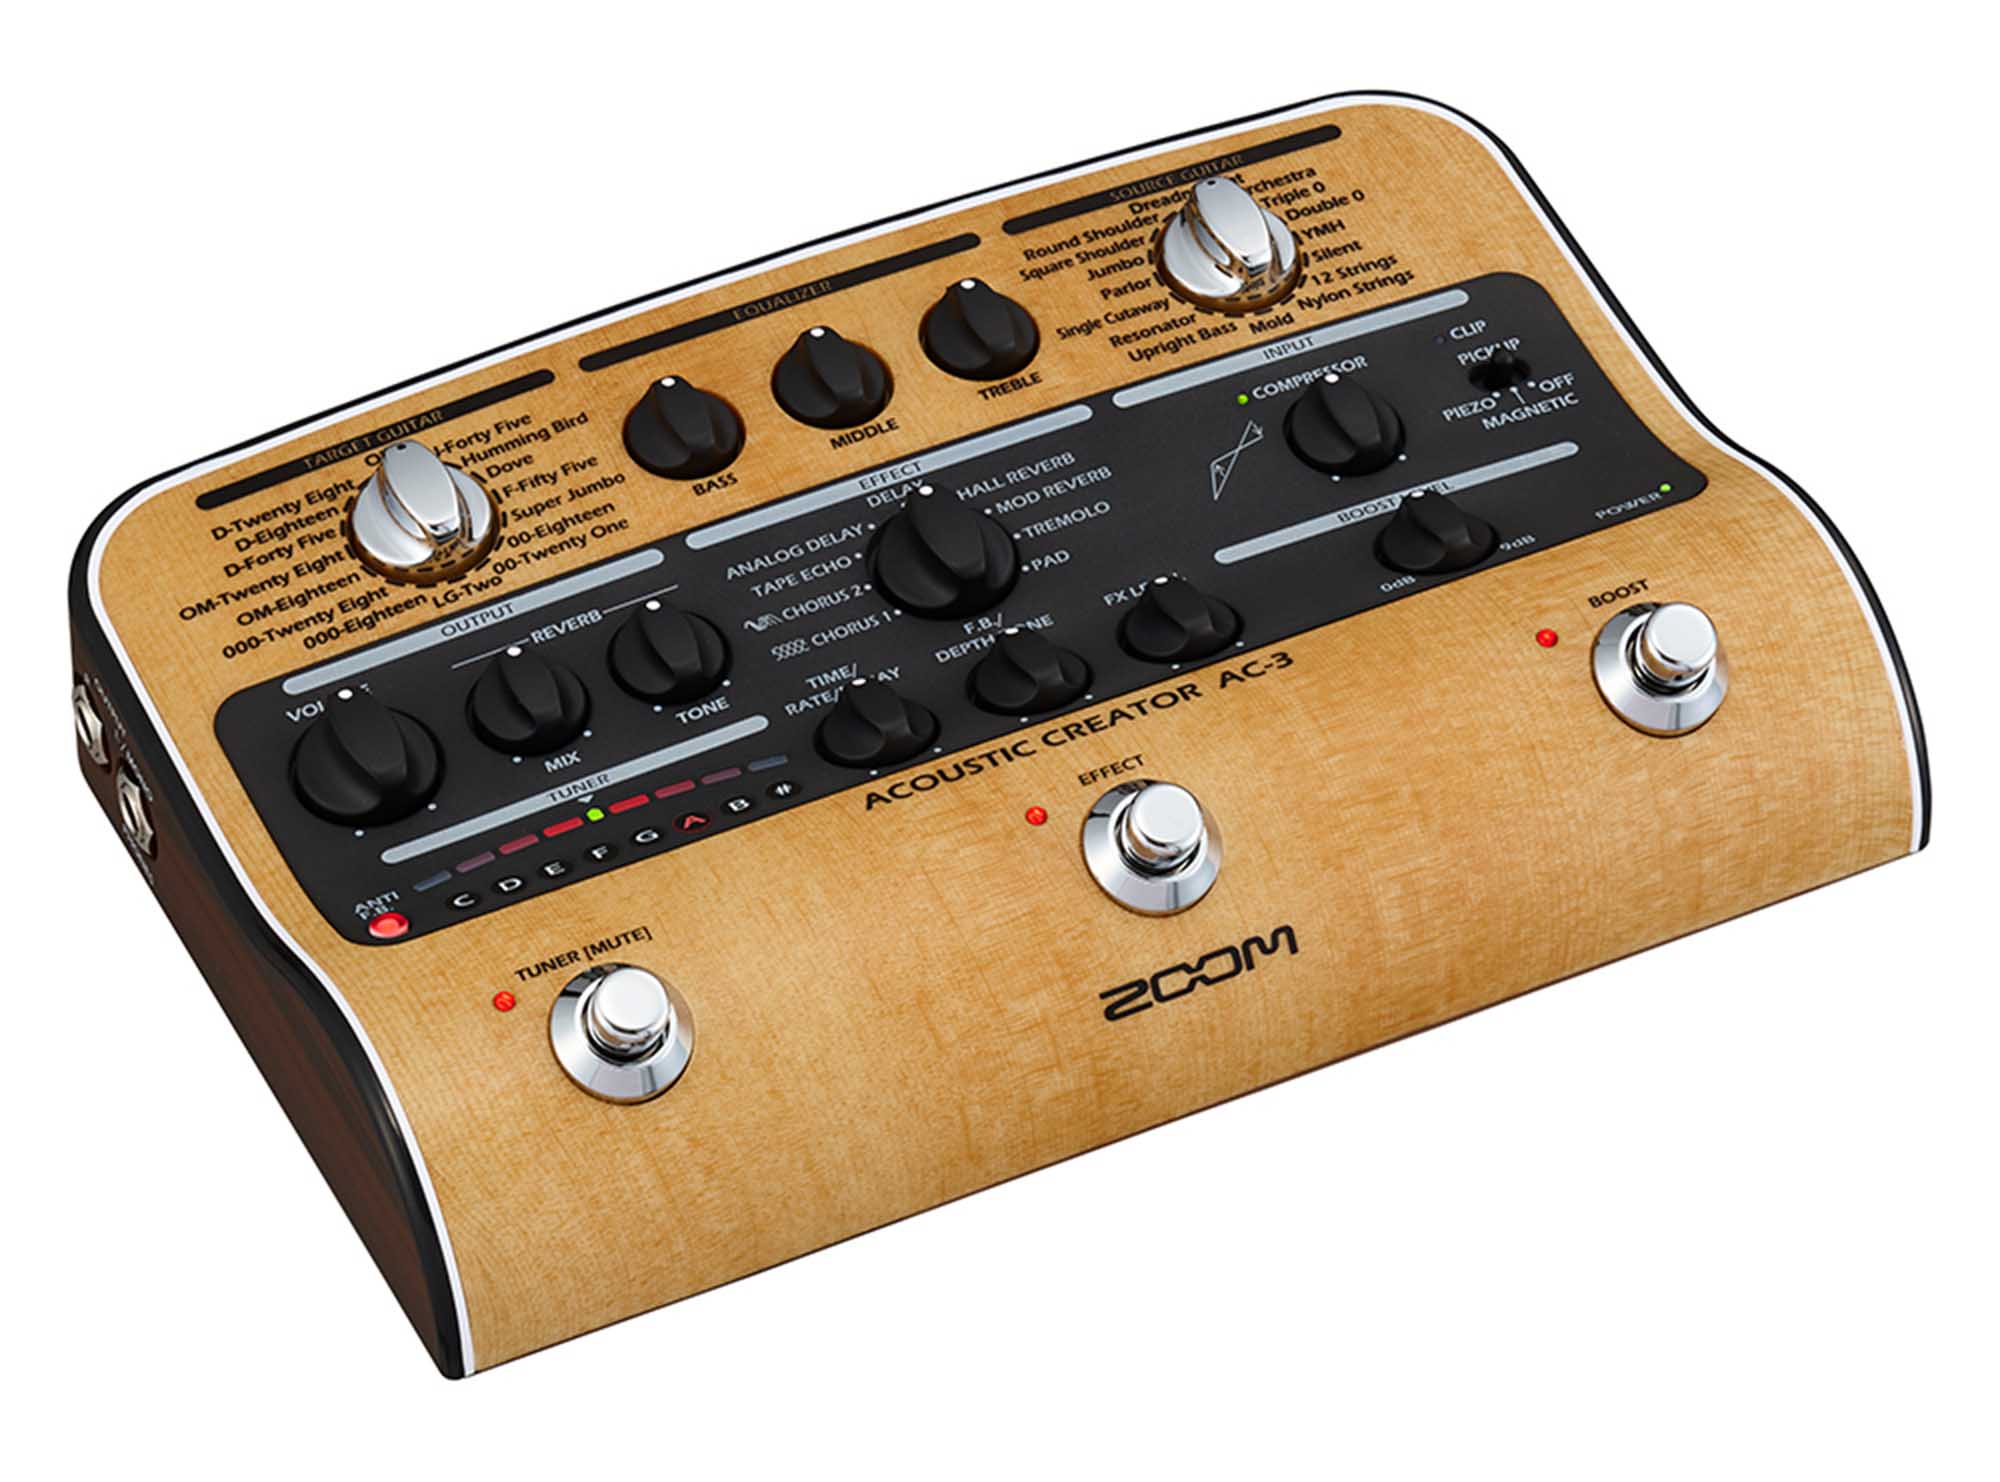 Zoom AC-3 Acoustic Creator Multi-Effects Pedal - Hollywood DJ